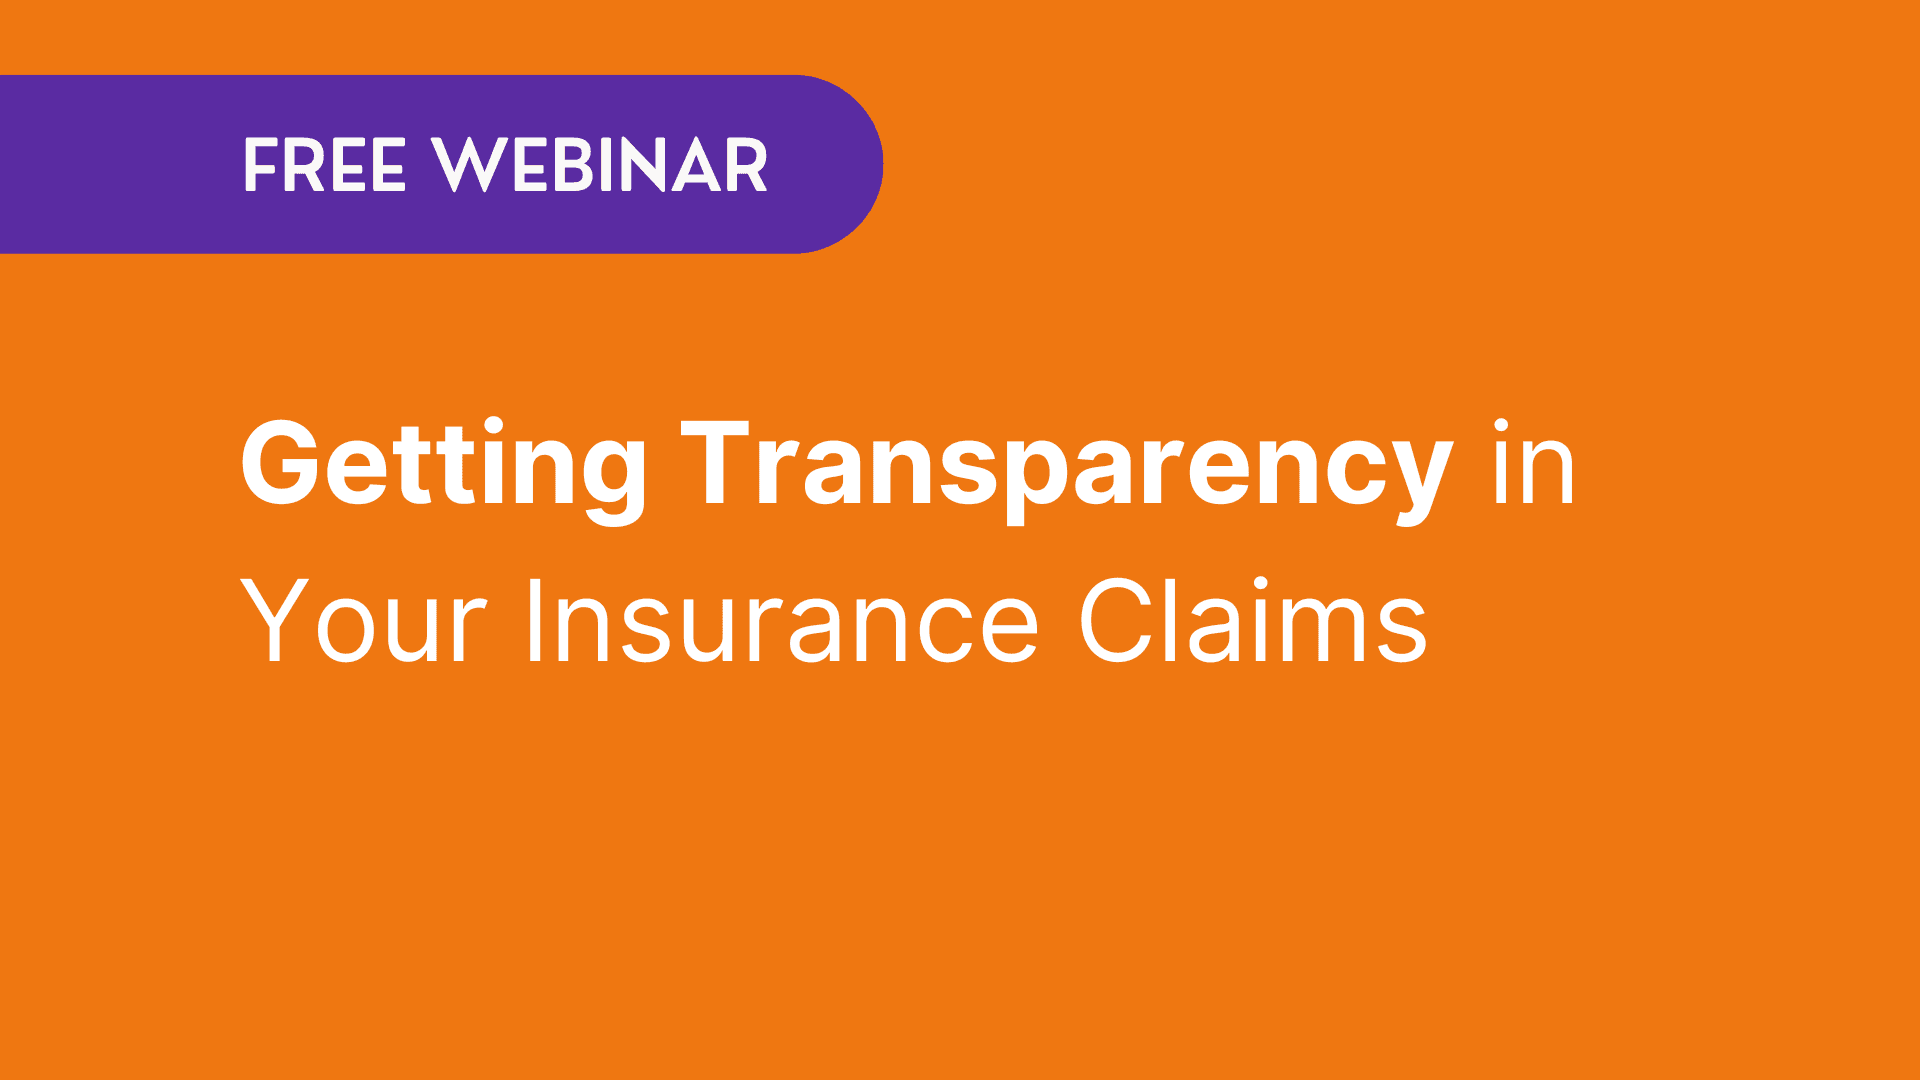 Free Webinar - Getting Transparency in Your Insurance Claims